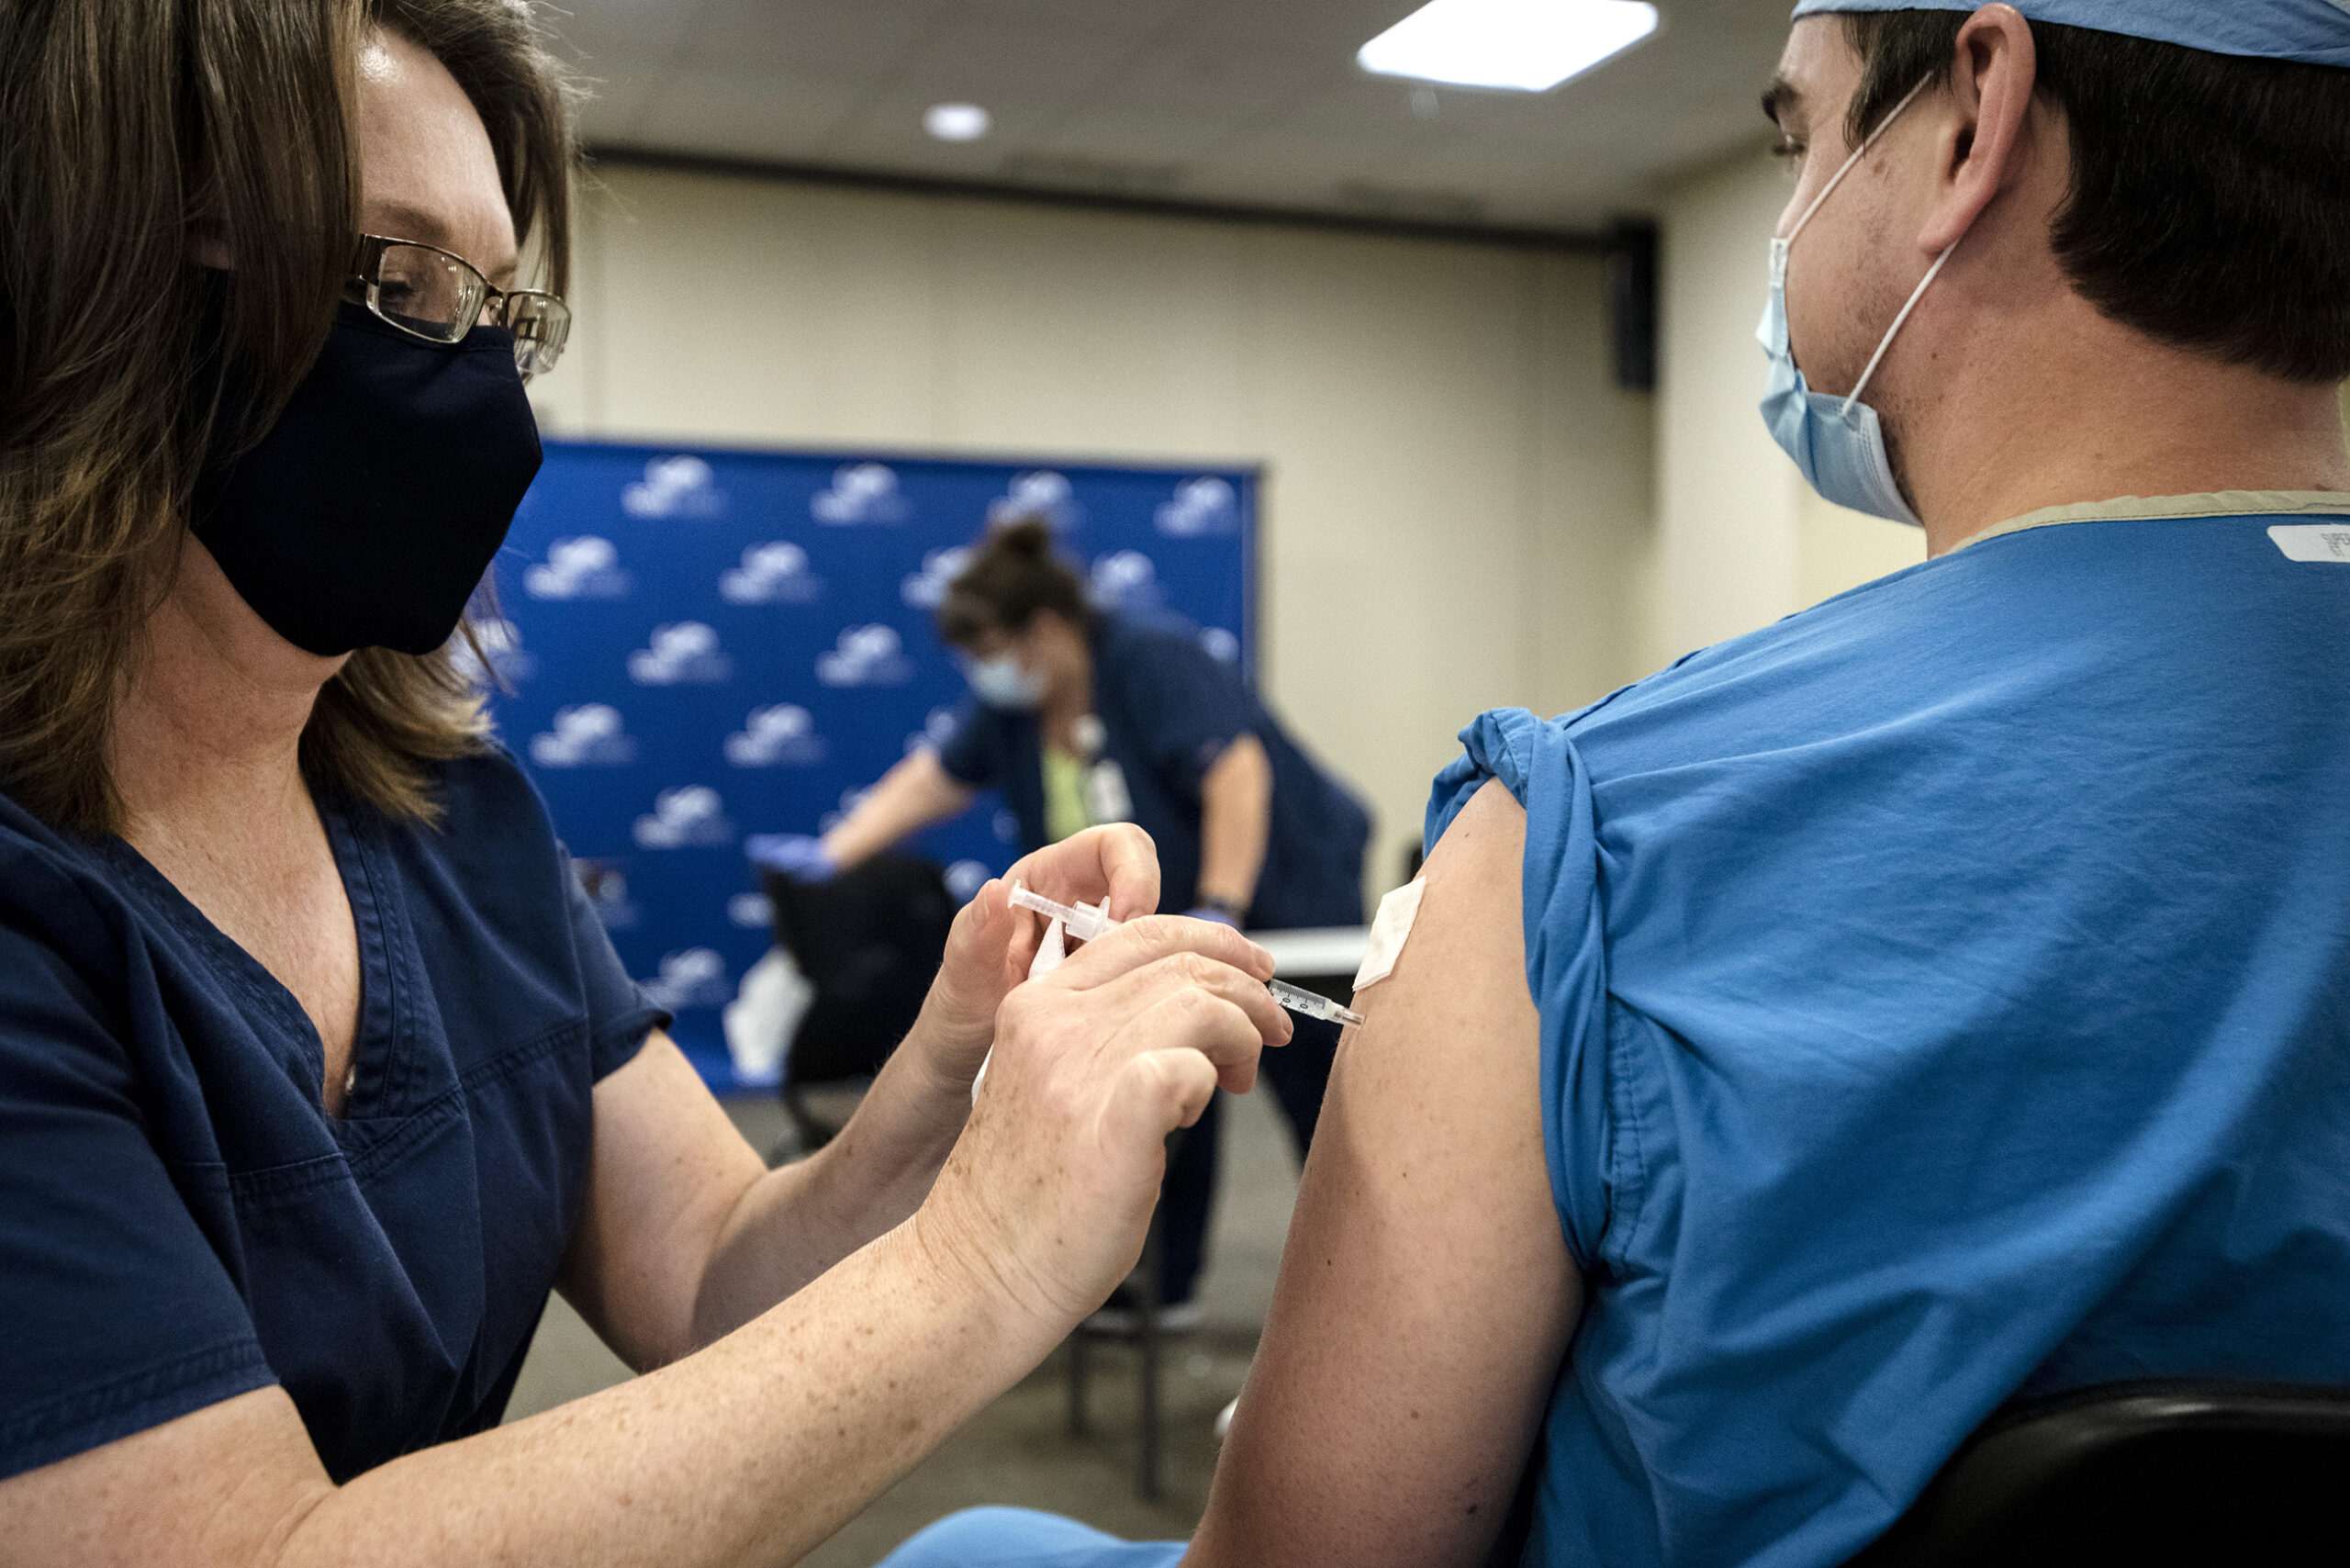 A nurse in a face mask gives a vaccine to a fellow healthcare worker in scrubs